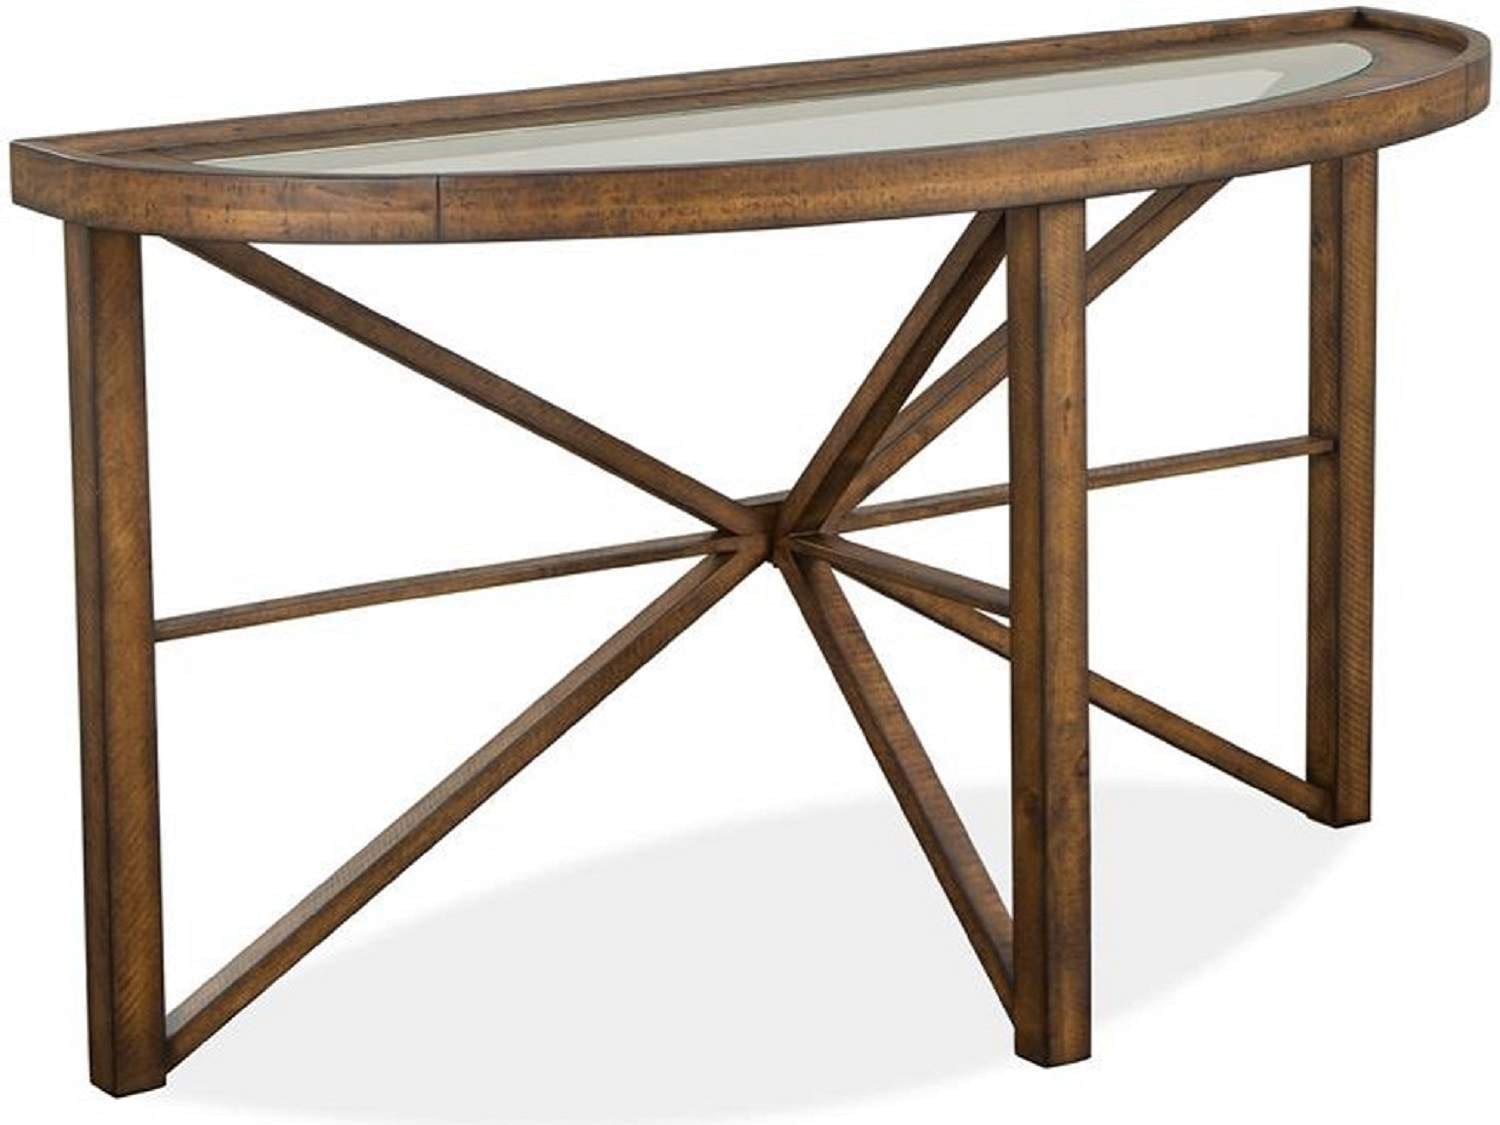 MILBANK Console Table